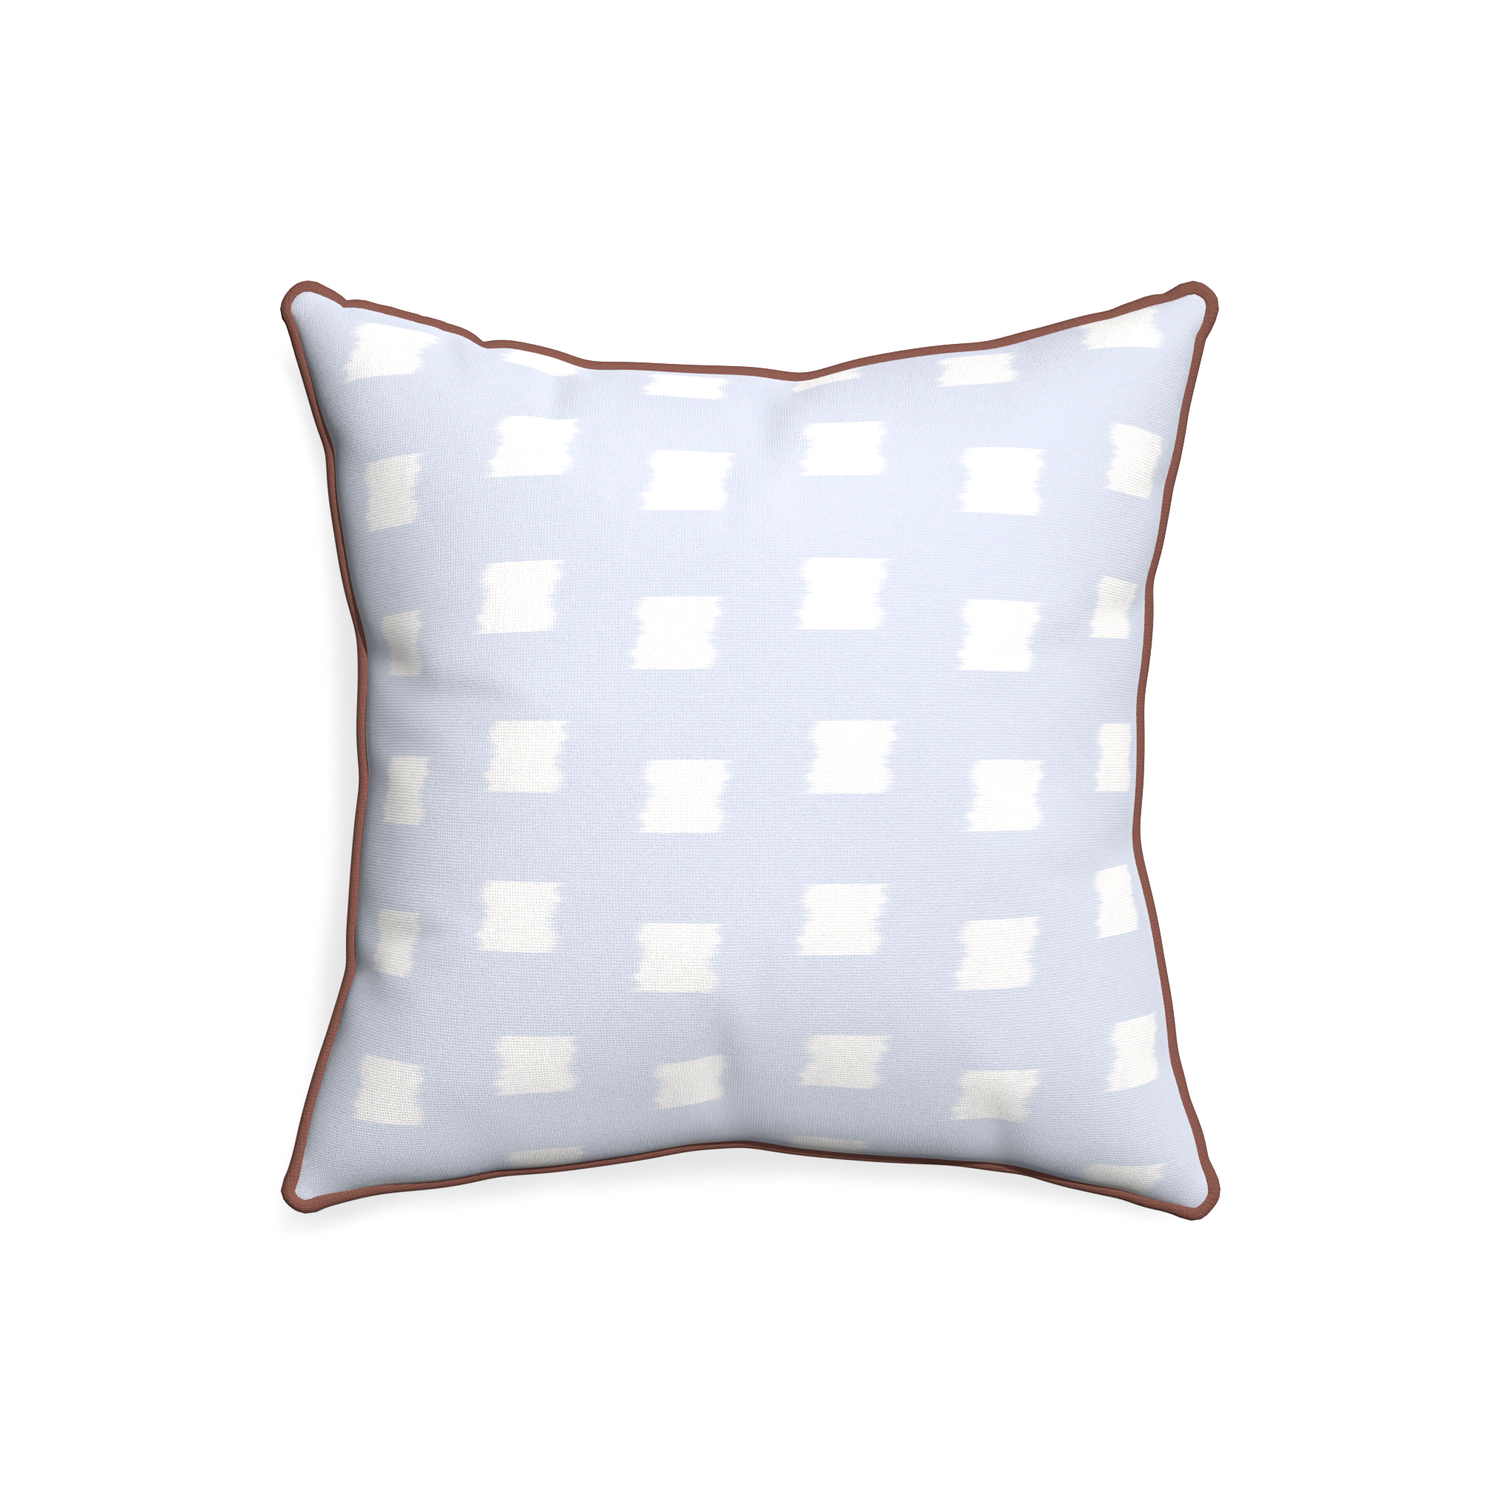 20-square denton custom sky blue patternpillow with w piping on white background